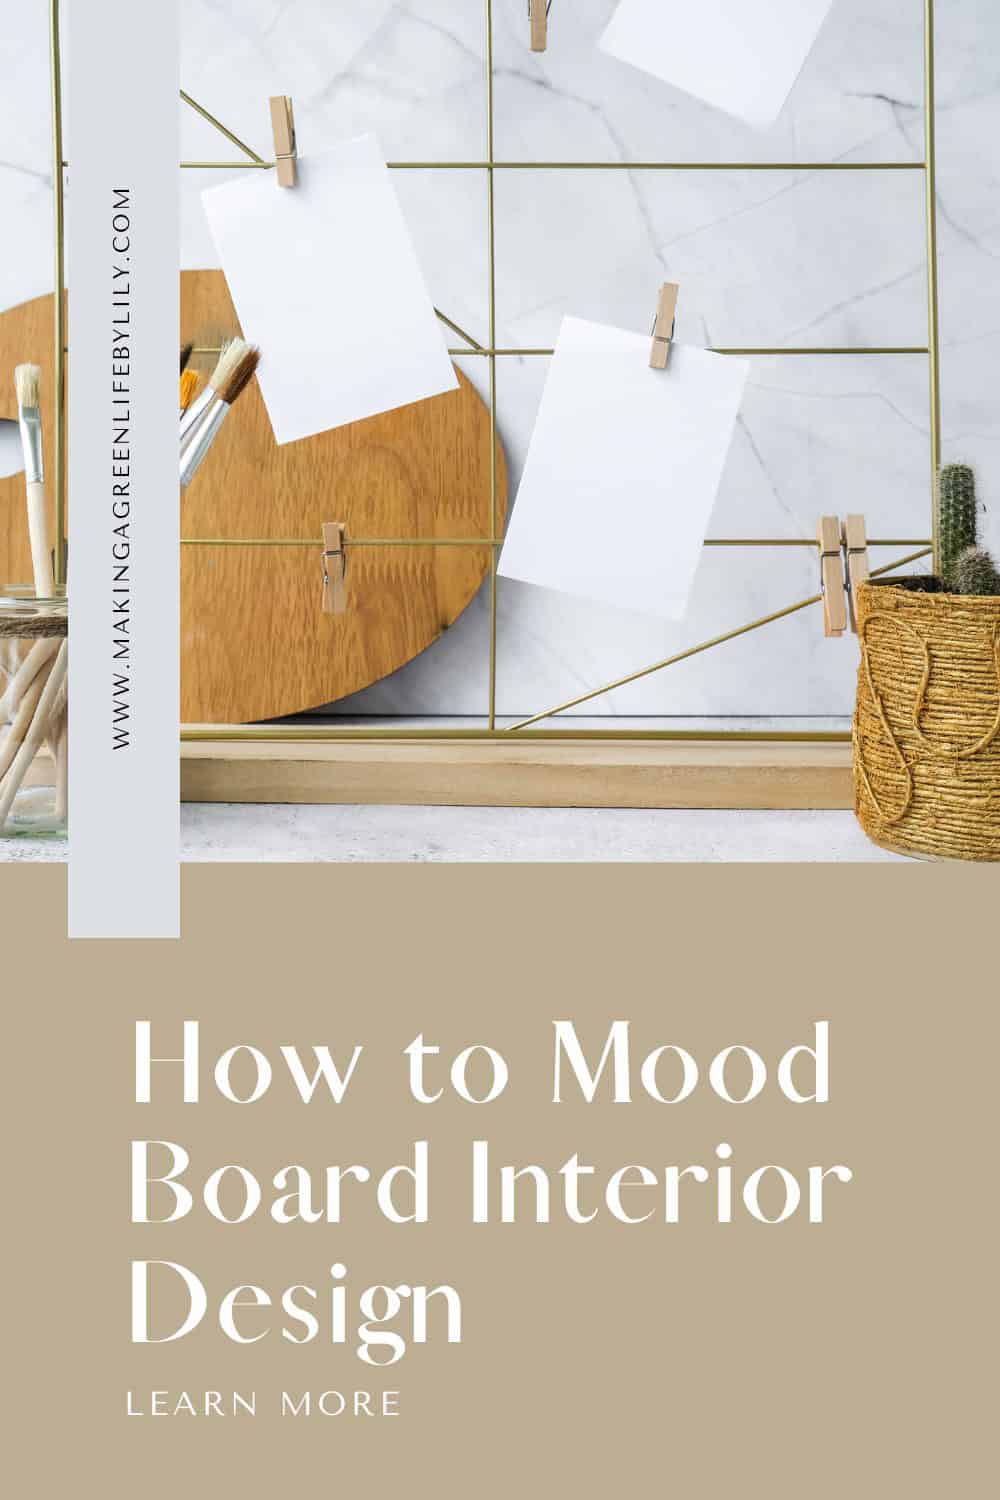 How to mood abord interior design